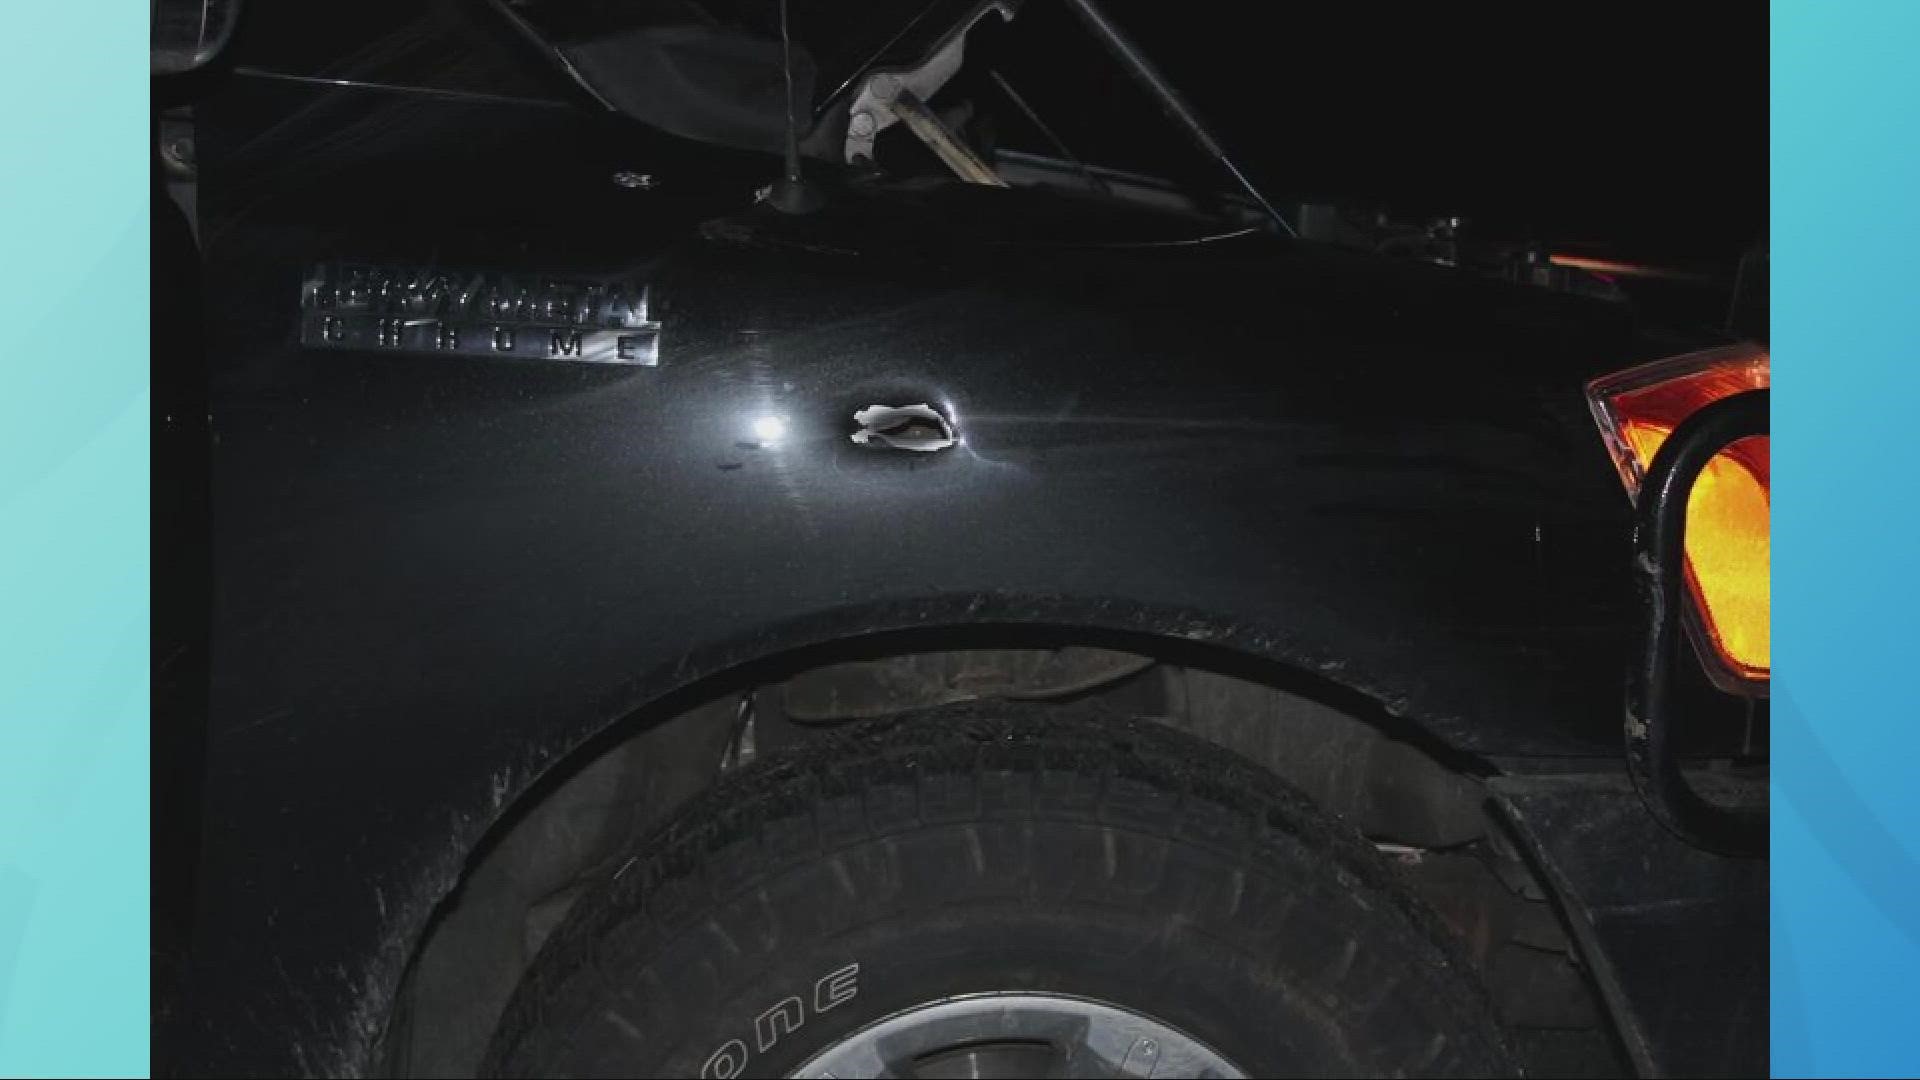 The driver of a silver Subaru fired shots that struck the side of a pickup truck during an apparent road rage incident on I-90 on Monday.